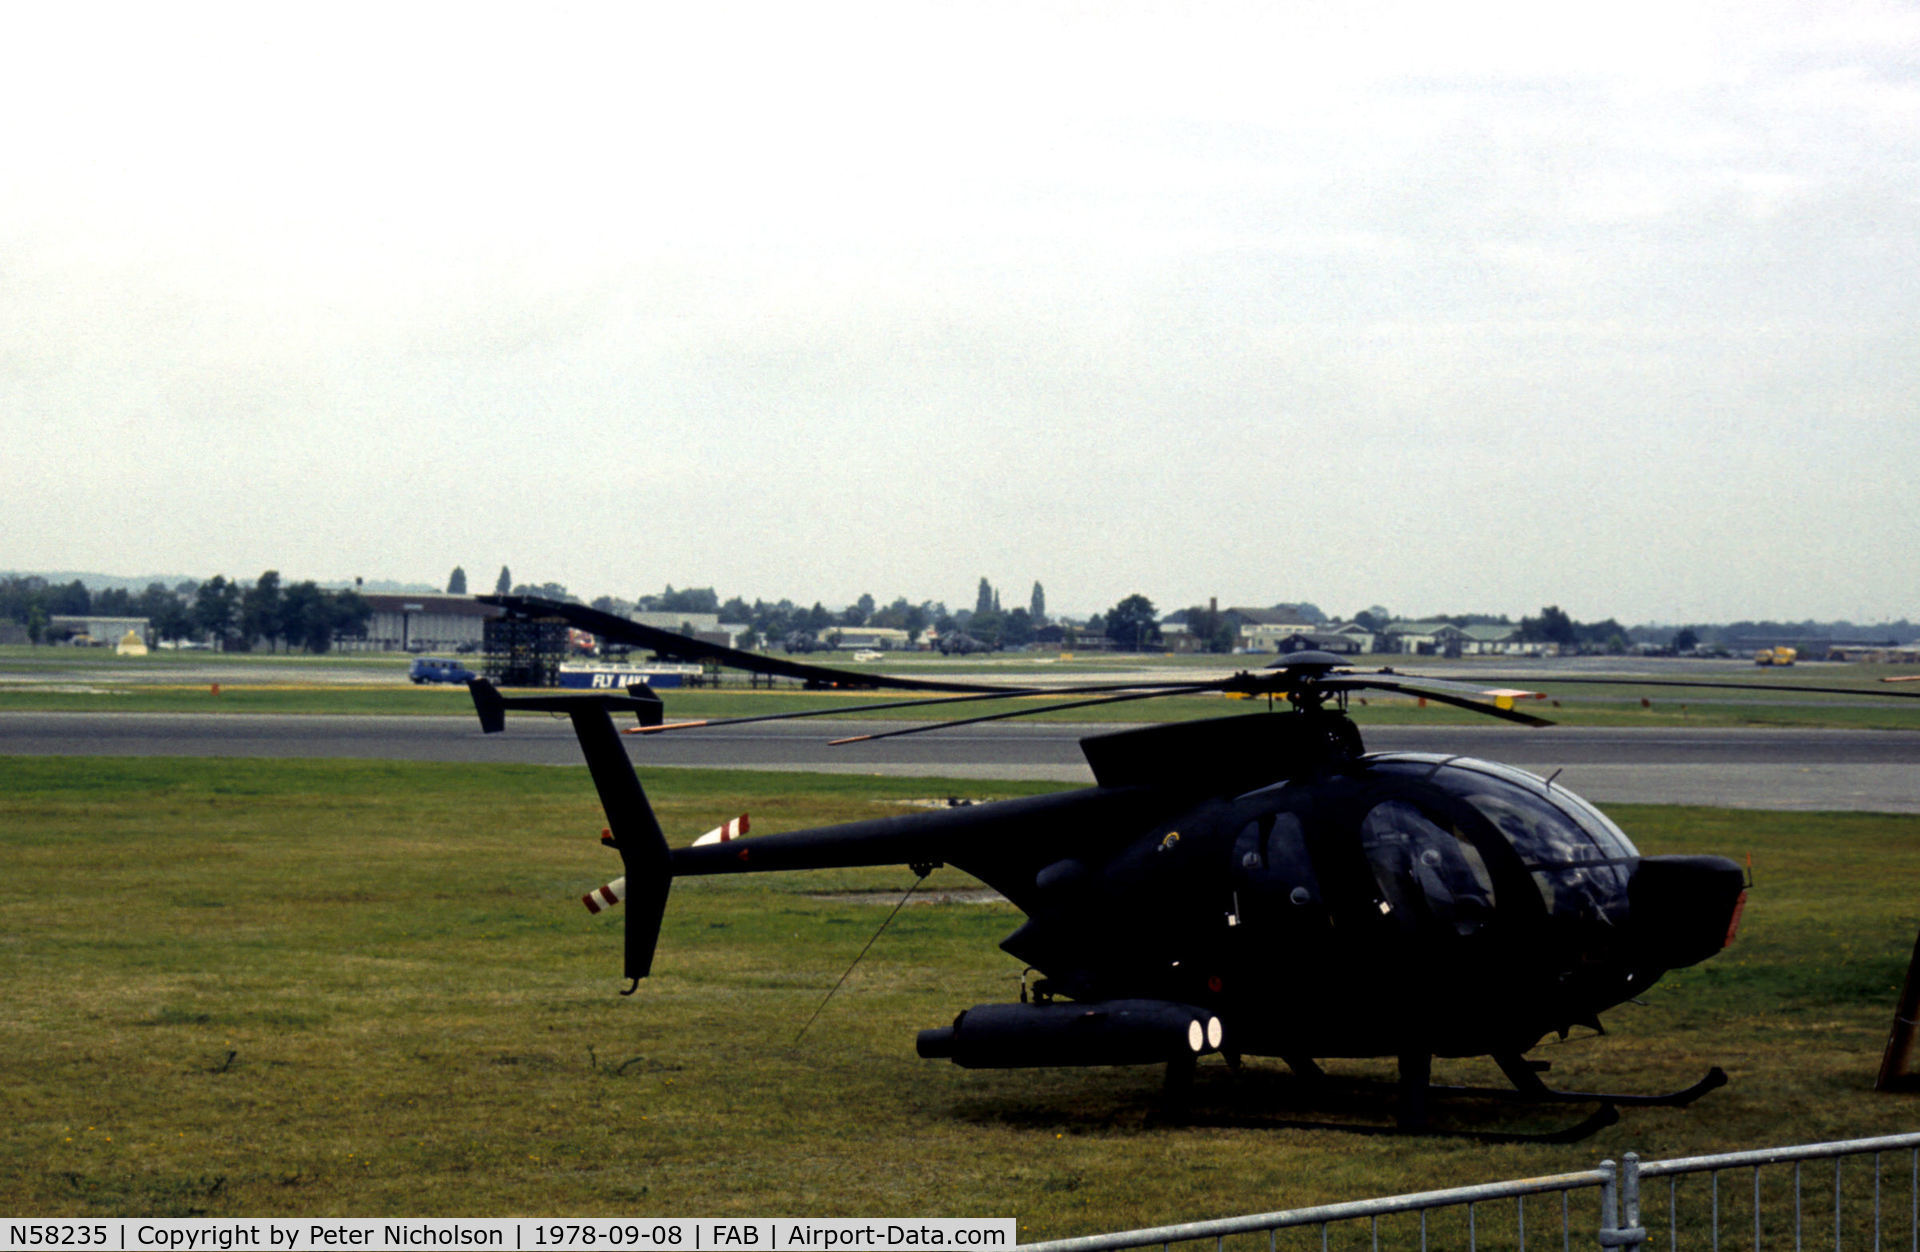 N58235, Hughes 500MD Defender (369MD) C/N 75-0323D, Hughes 500MD Defender on the flight-line at the 1978 SBAC Farnborough Airshow.